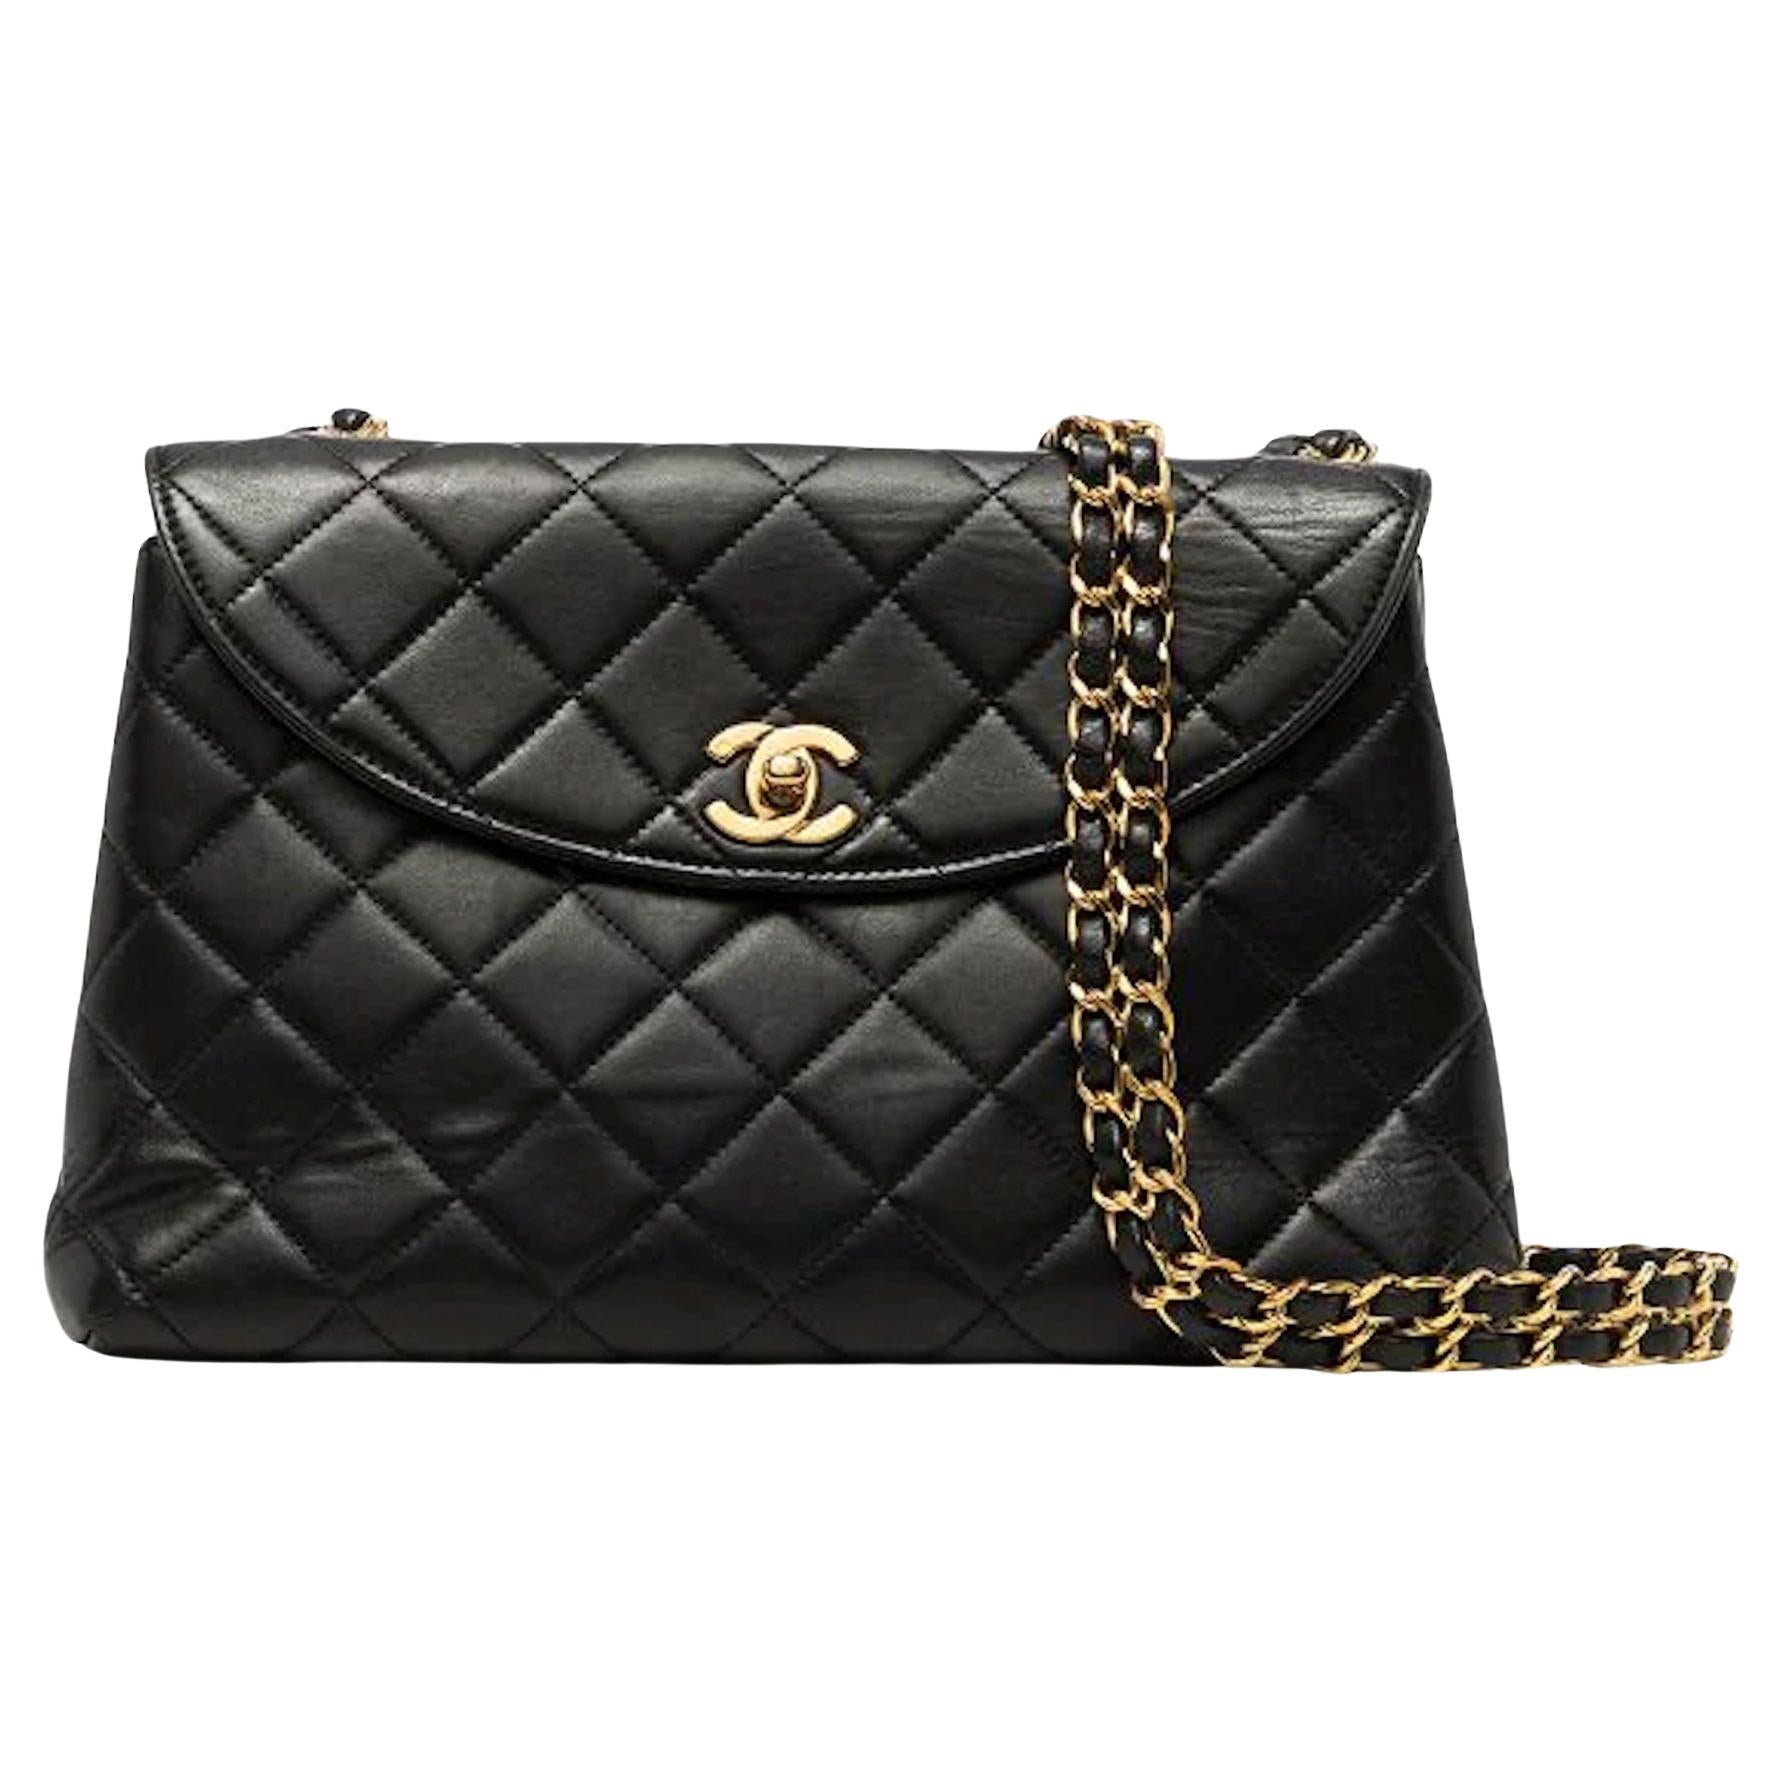 Puzzles EGYPT - Chanel Classic Flap bag Lambskin leather